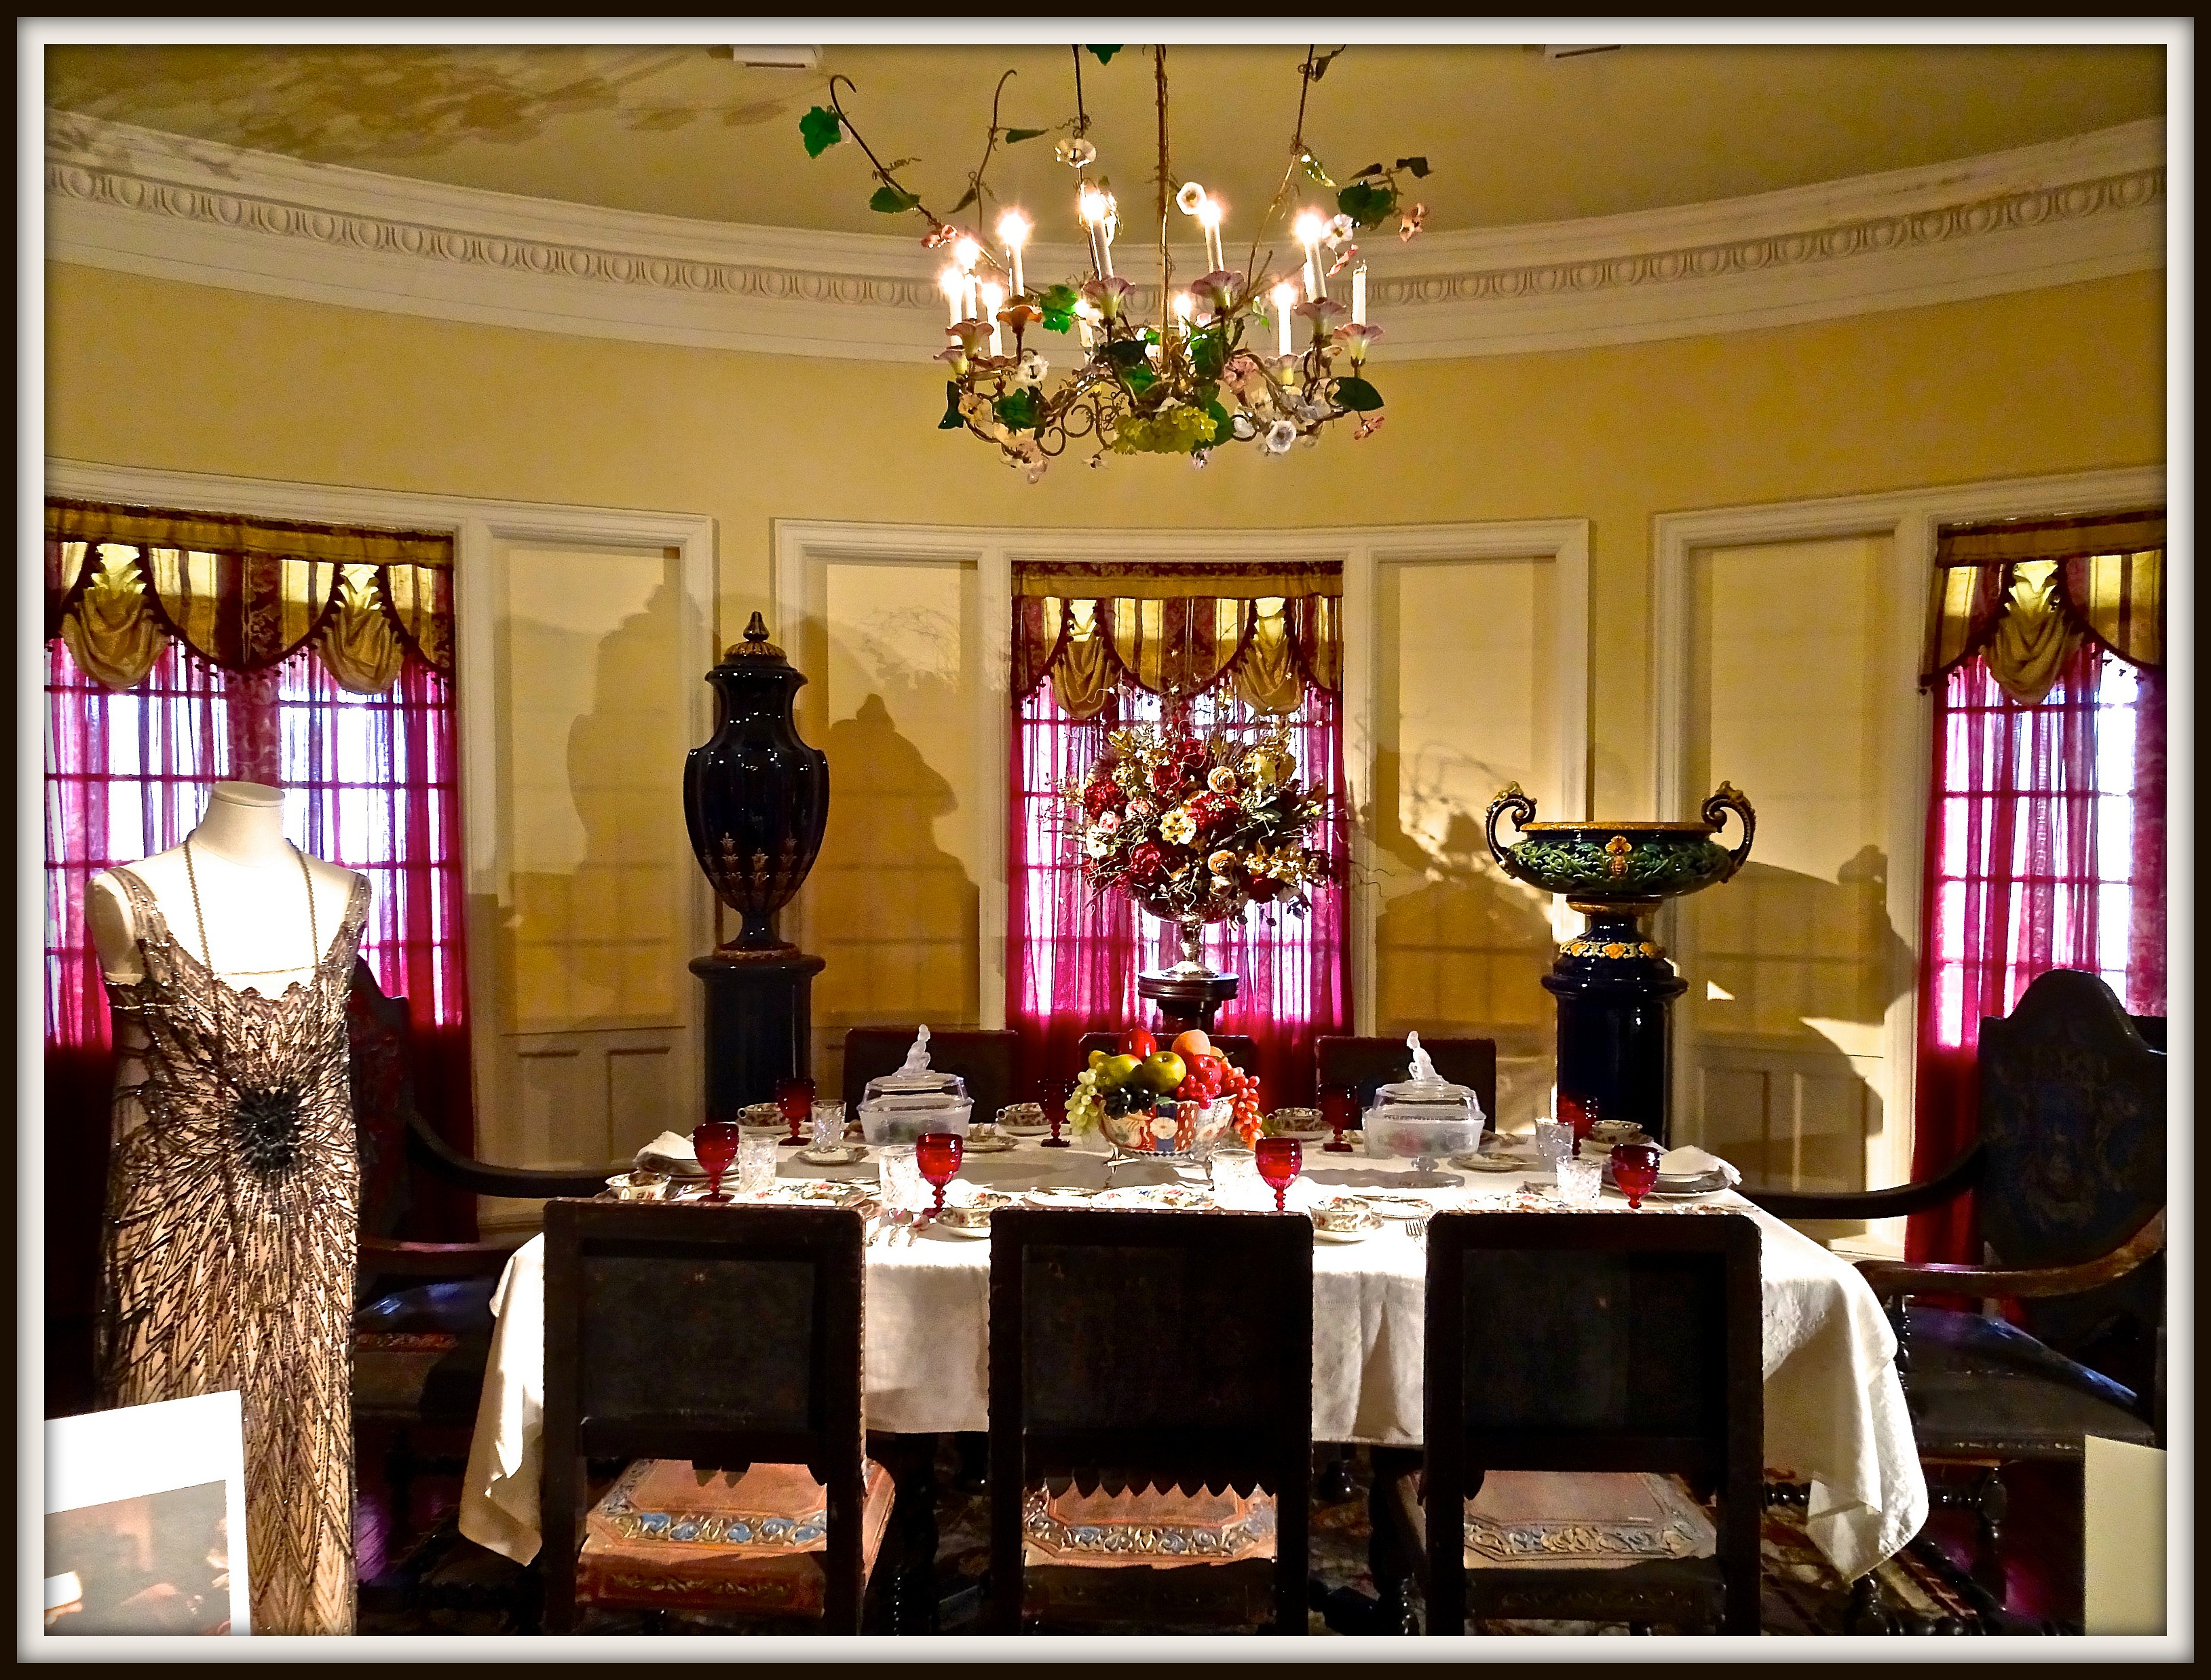 Downton Abbey Exhibit at Lightner Museum in St Augustine In Photos